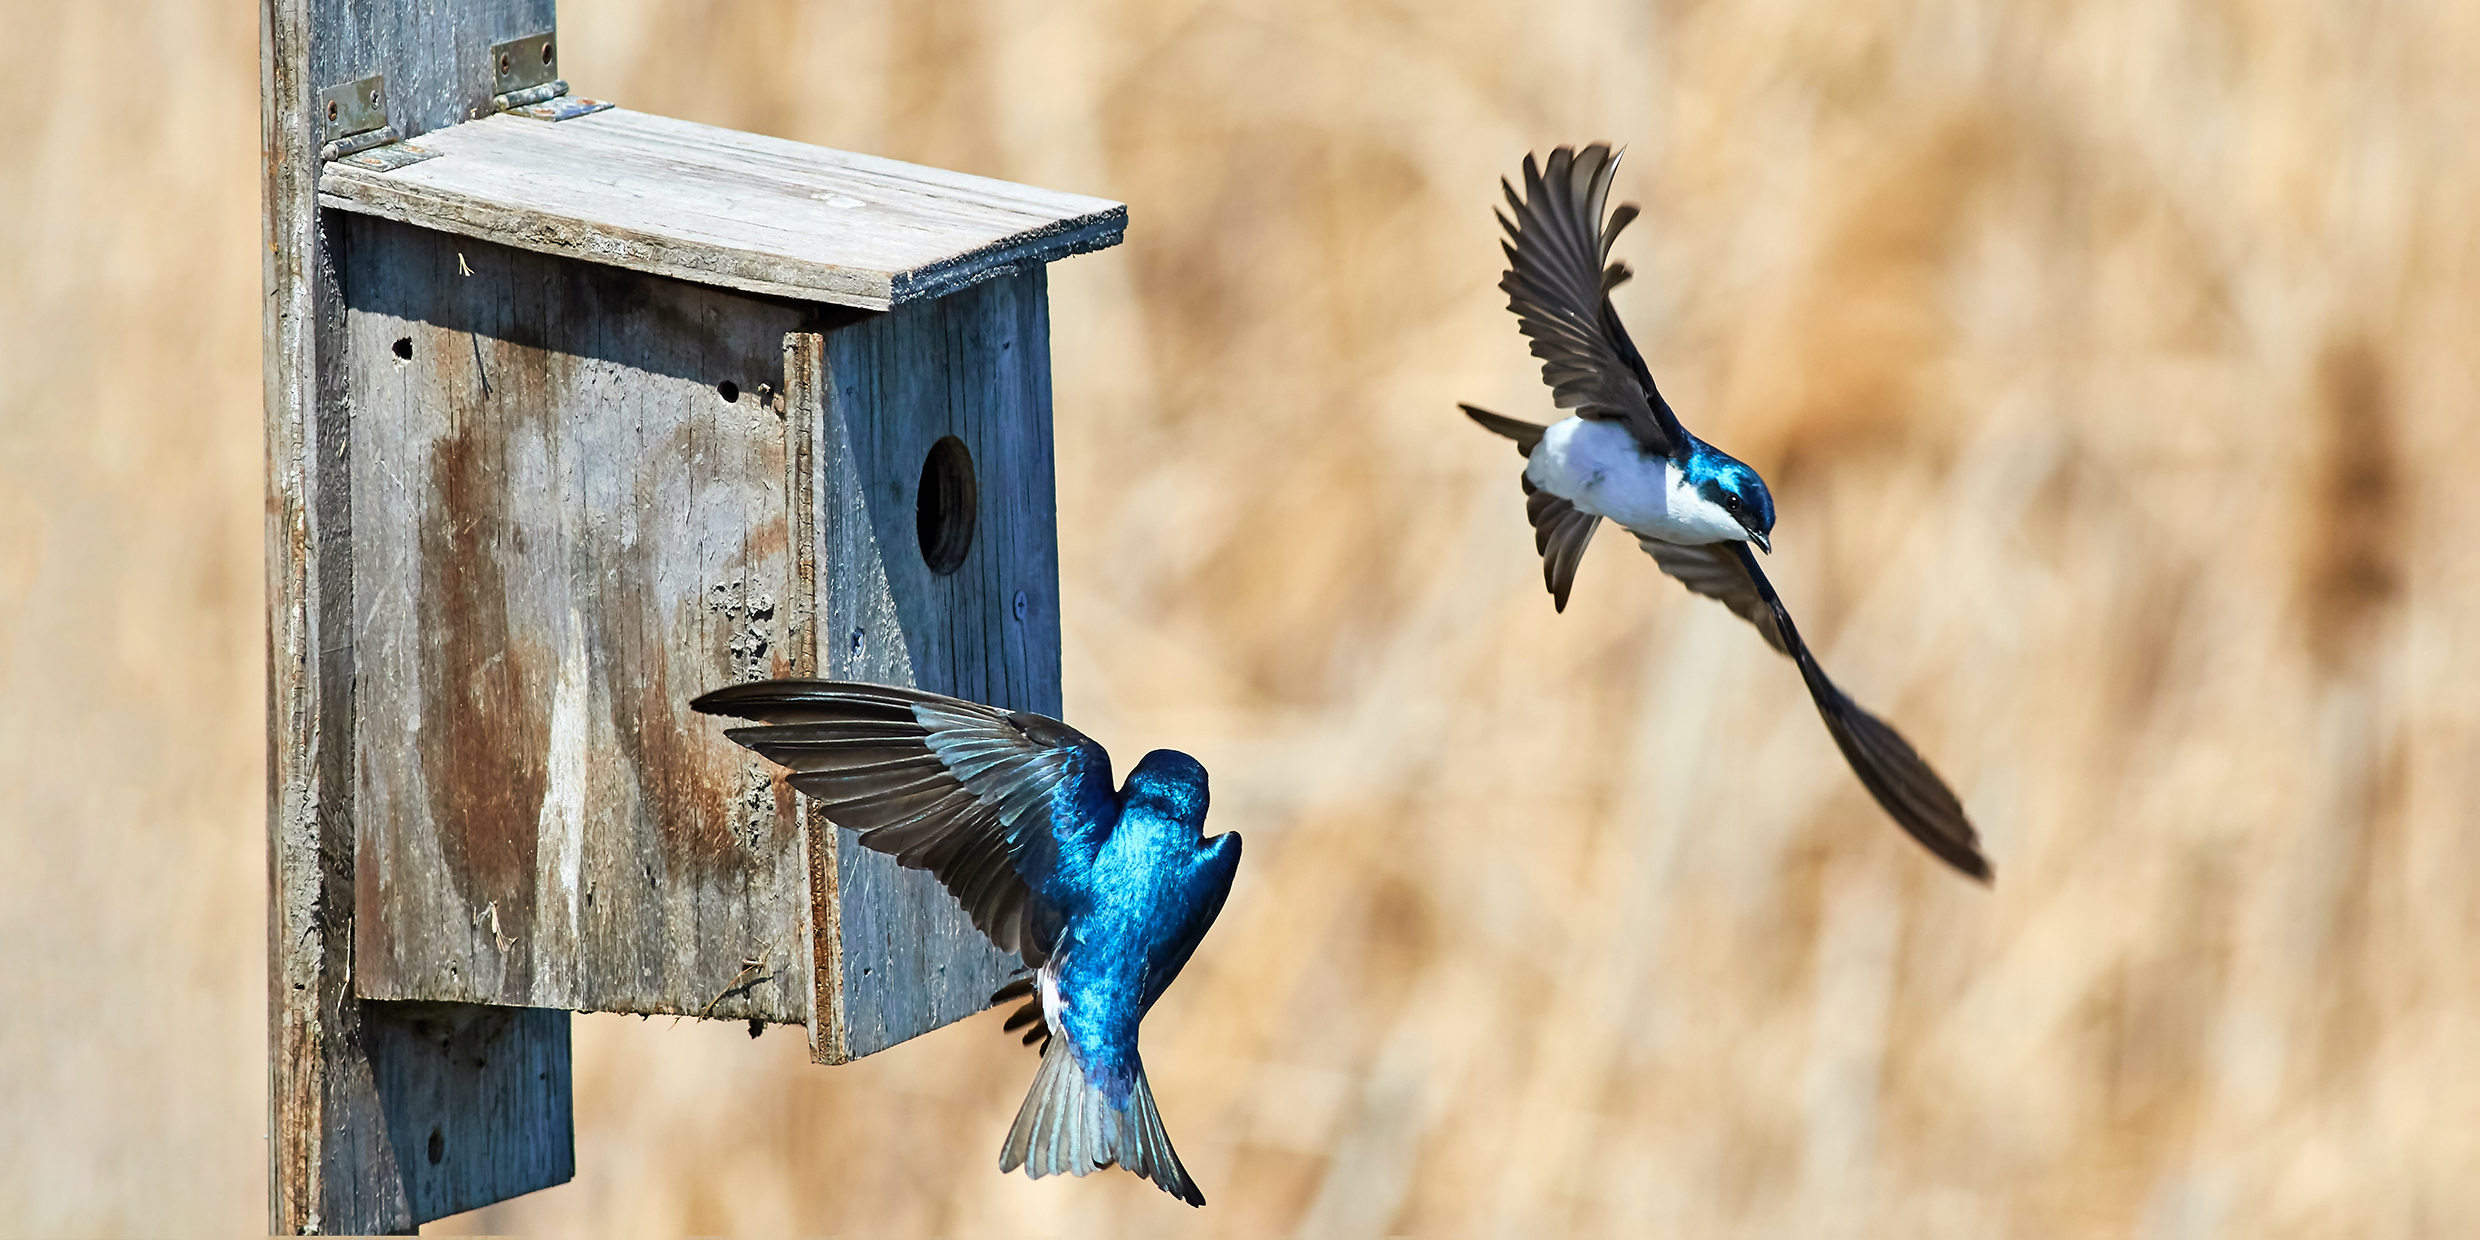 Image of two tree swallows flying near a nesting box